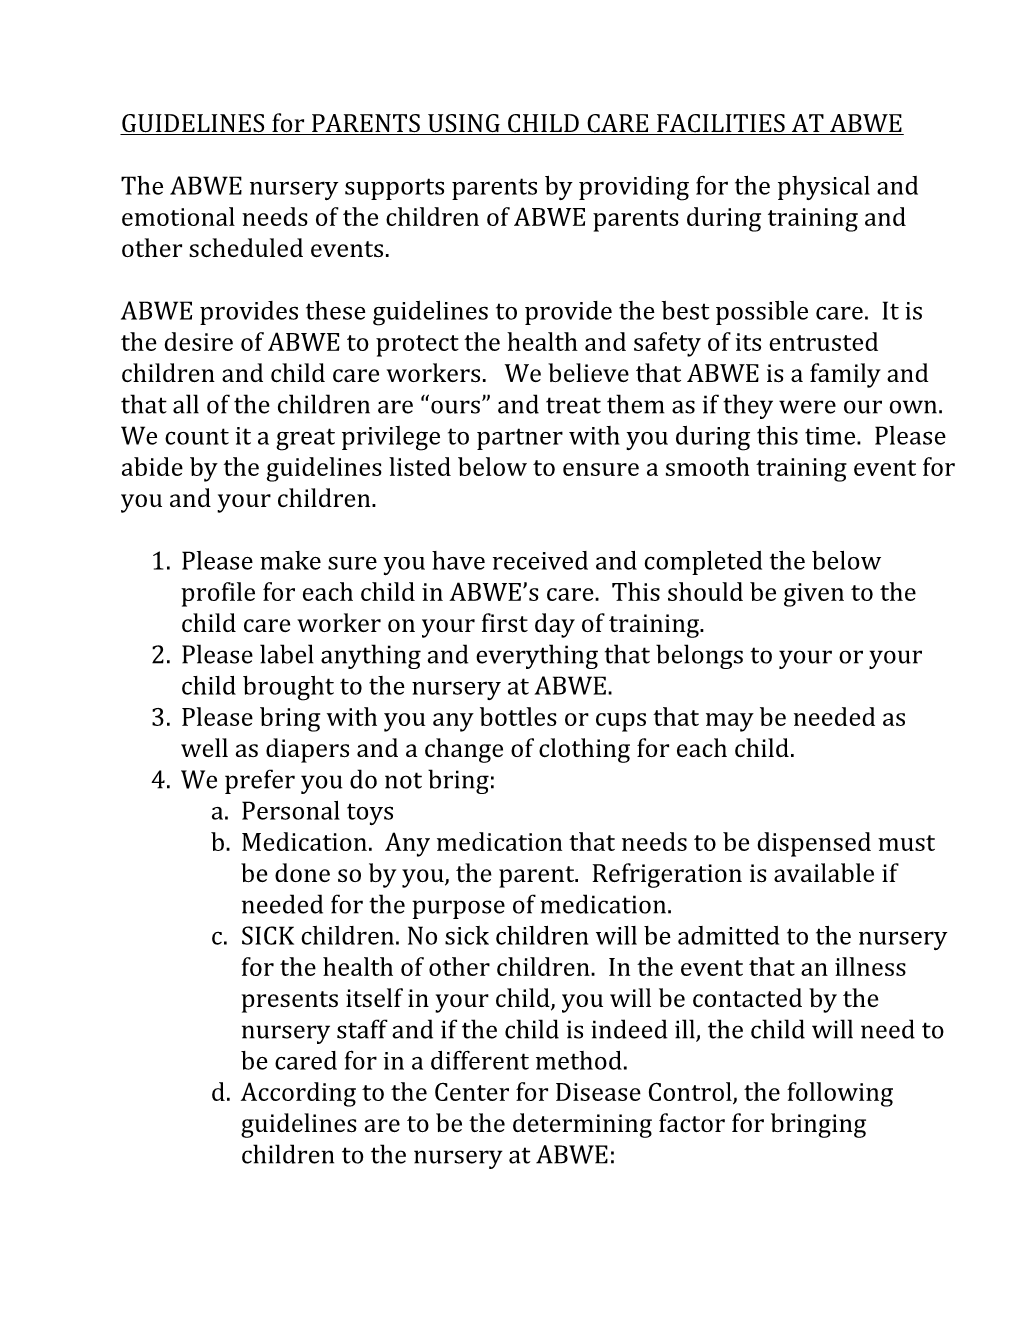 GUIDELINES for PARENTS USING CHILD CARE FACILITIES at ABWE